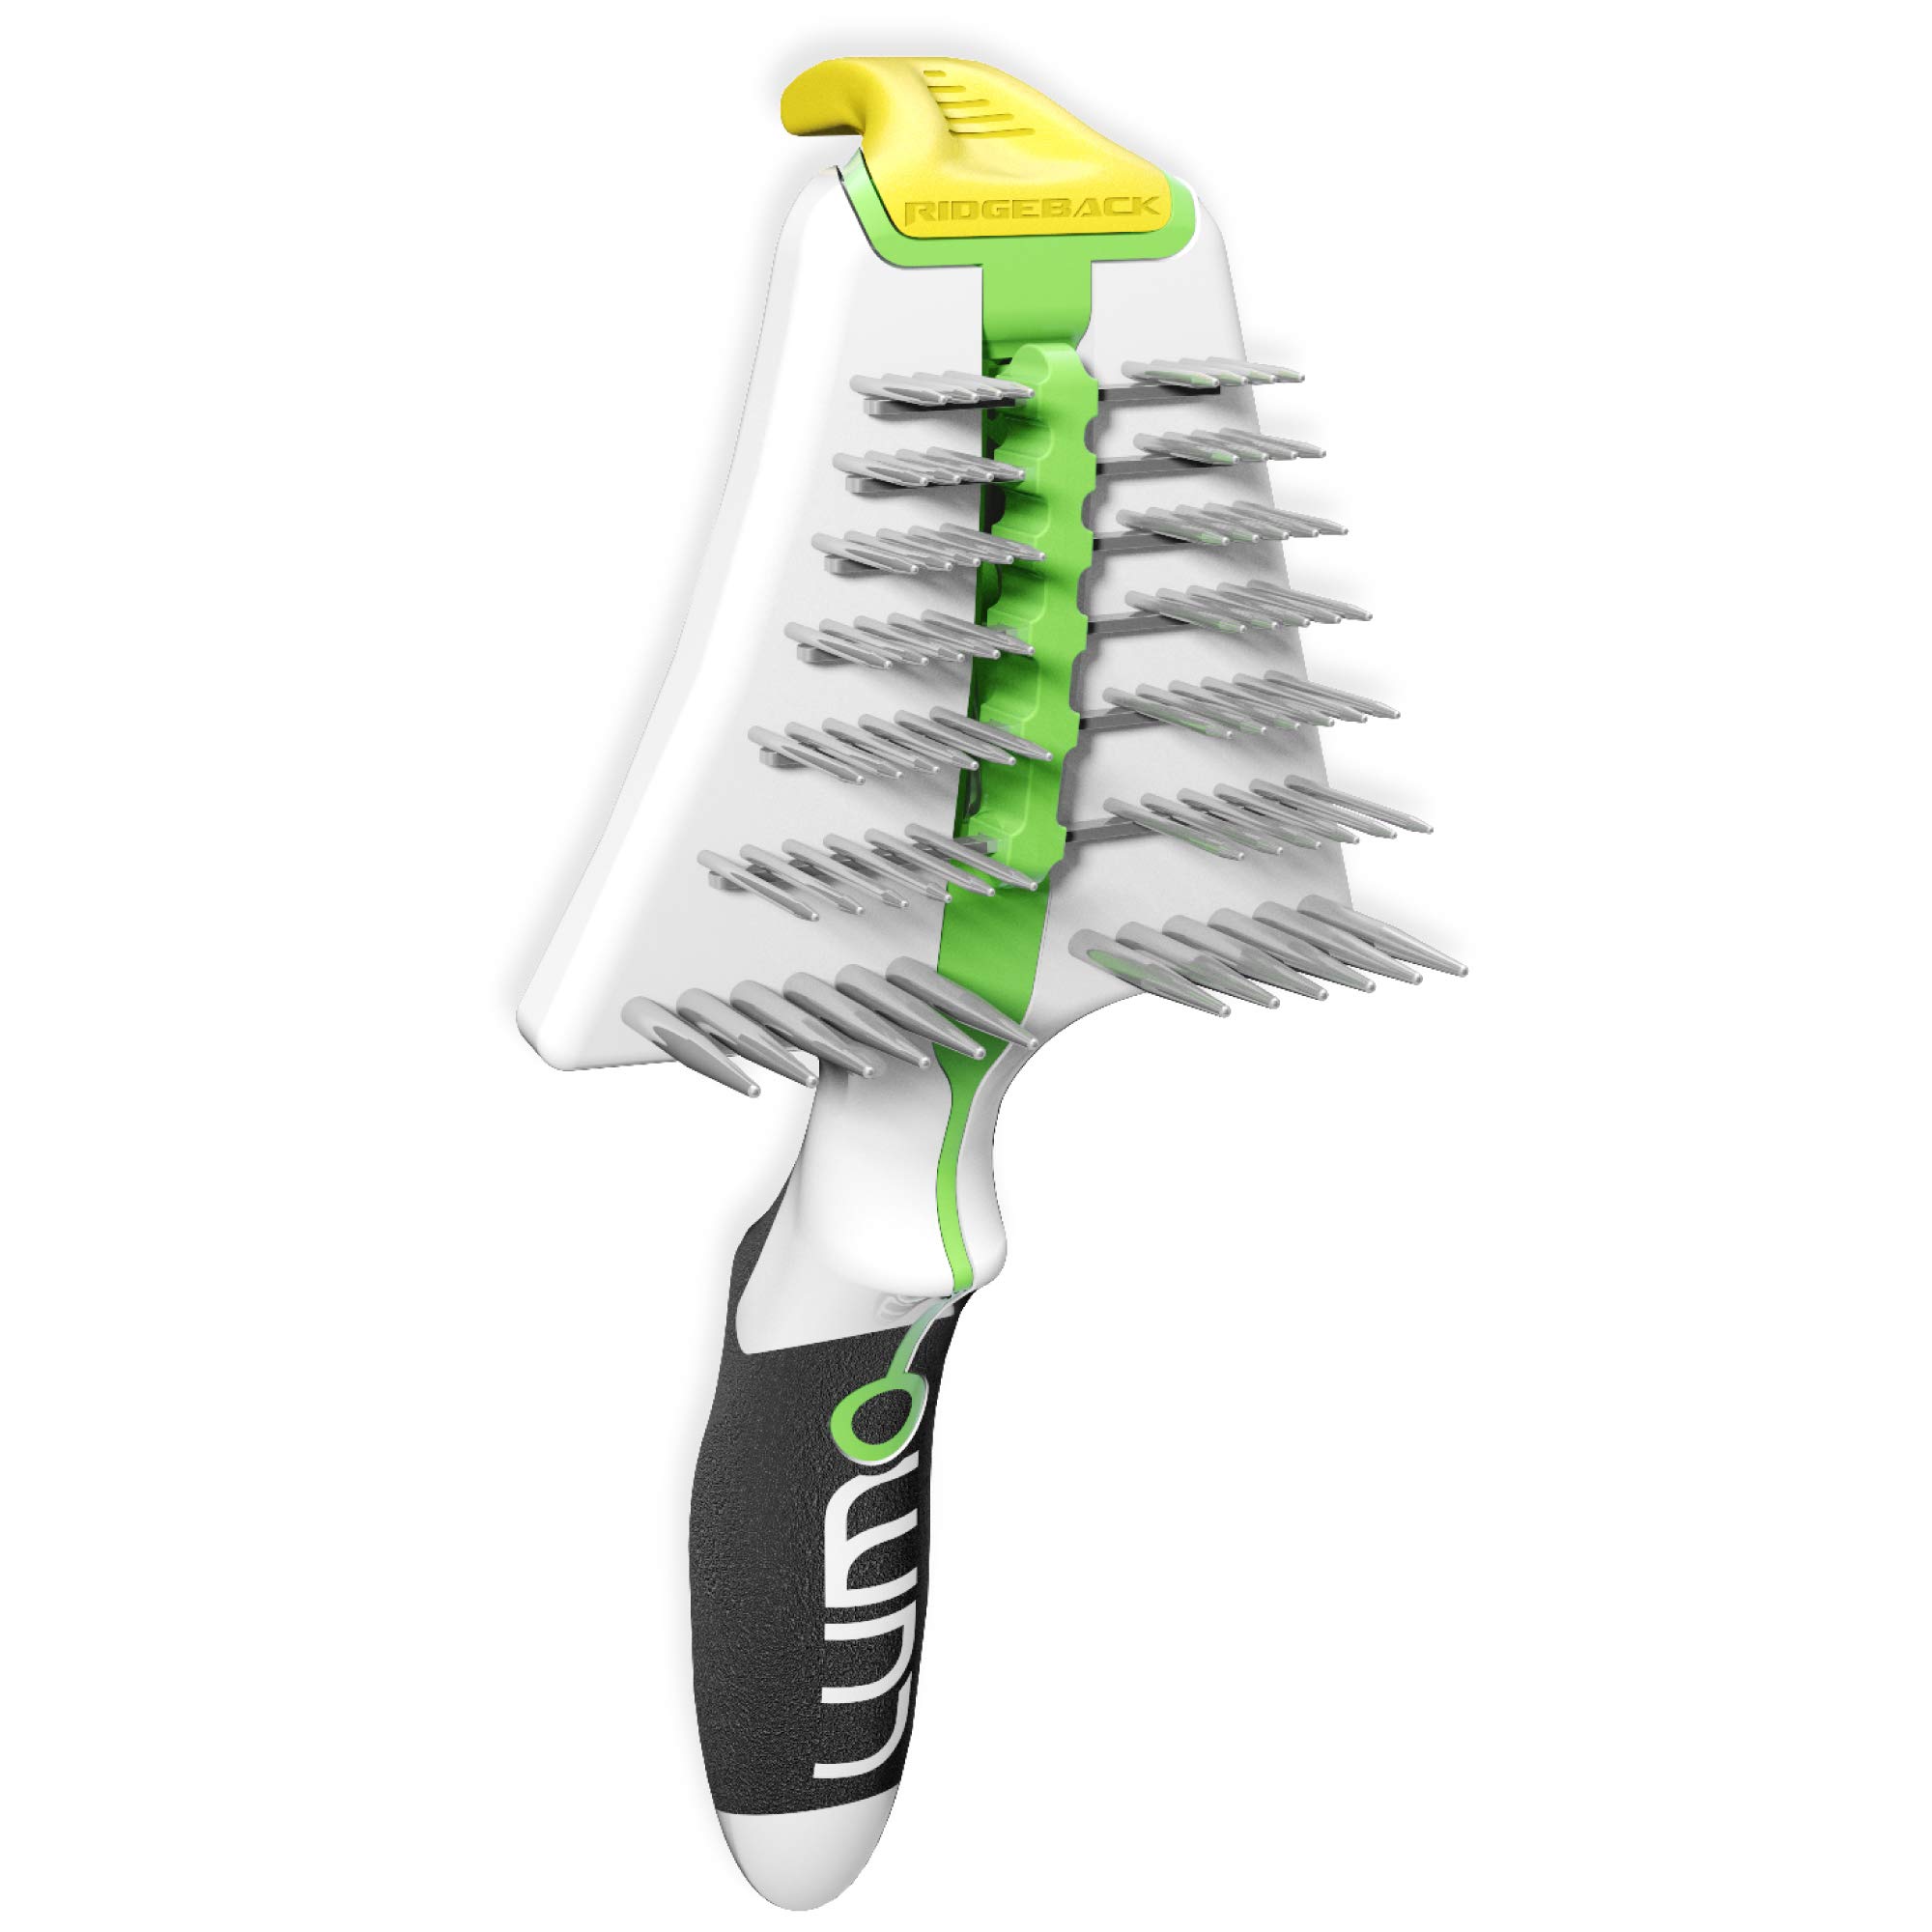 LUMO: All-in-one Self-cleaning Pro Quality grooming Tool for Long Haired Pets (e.g. golden Retriever Husky)